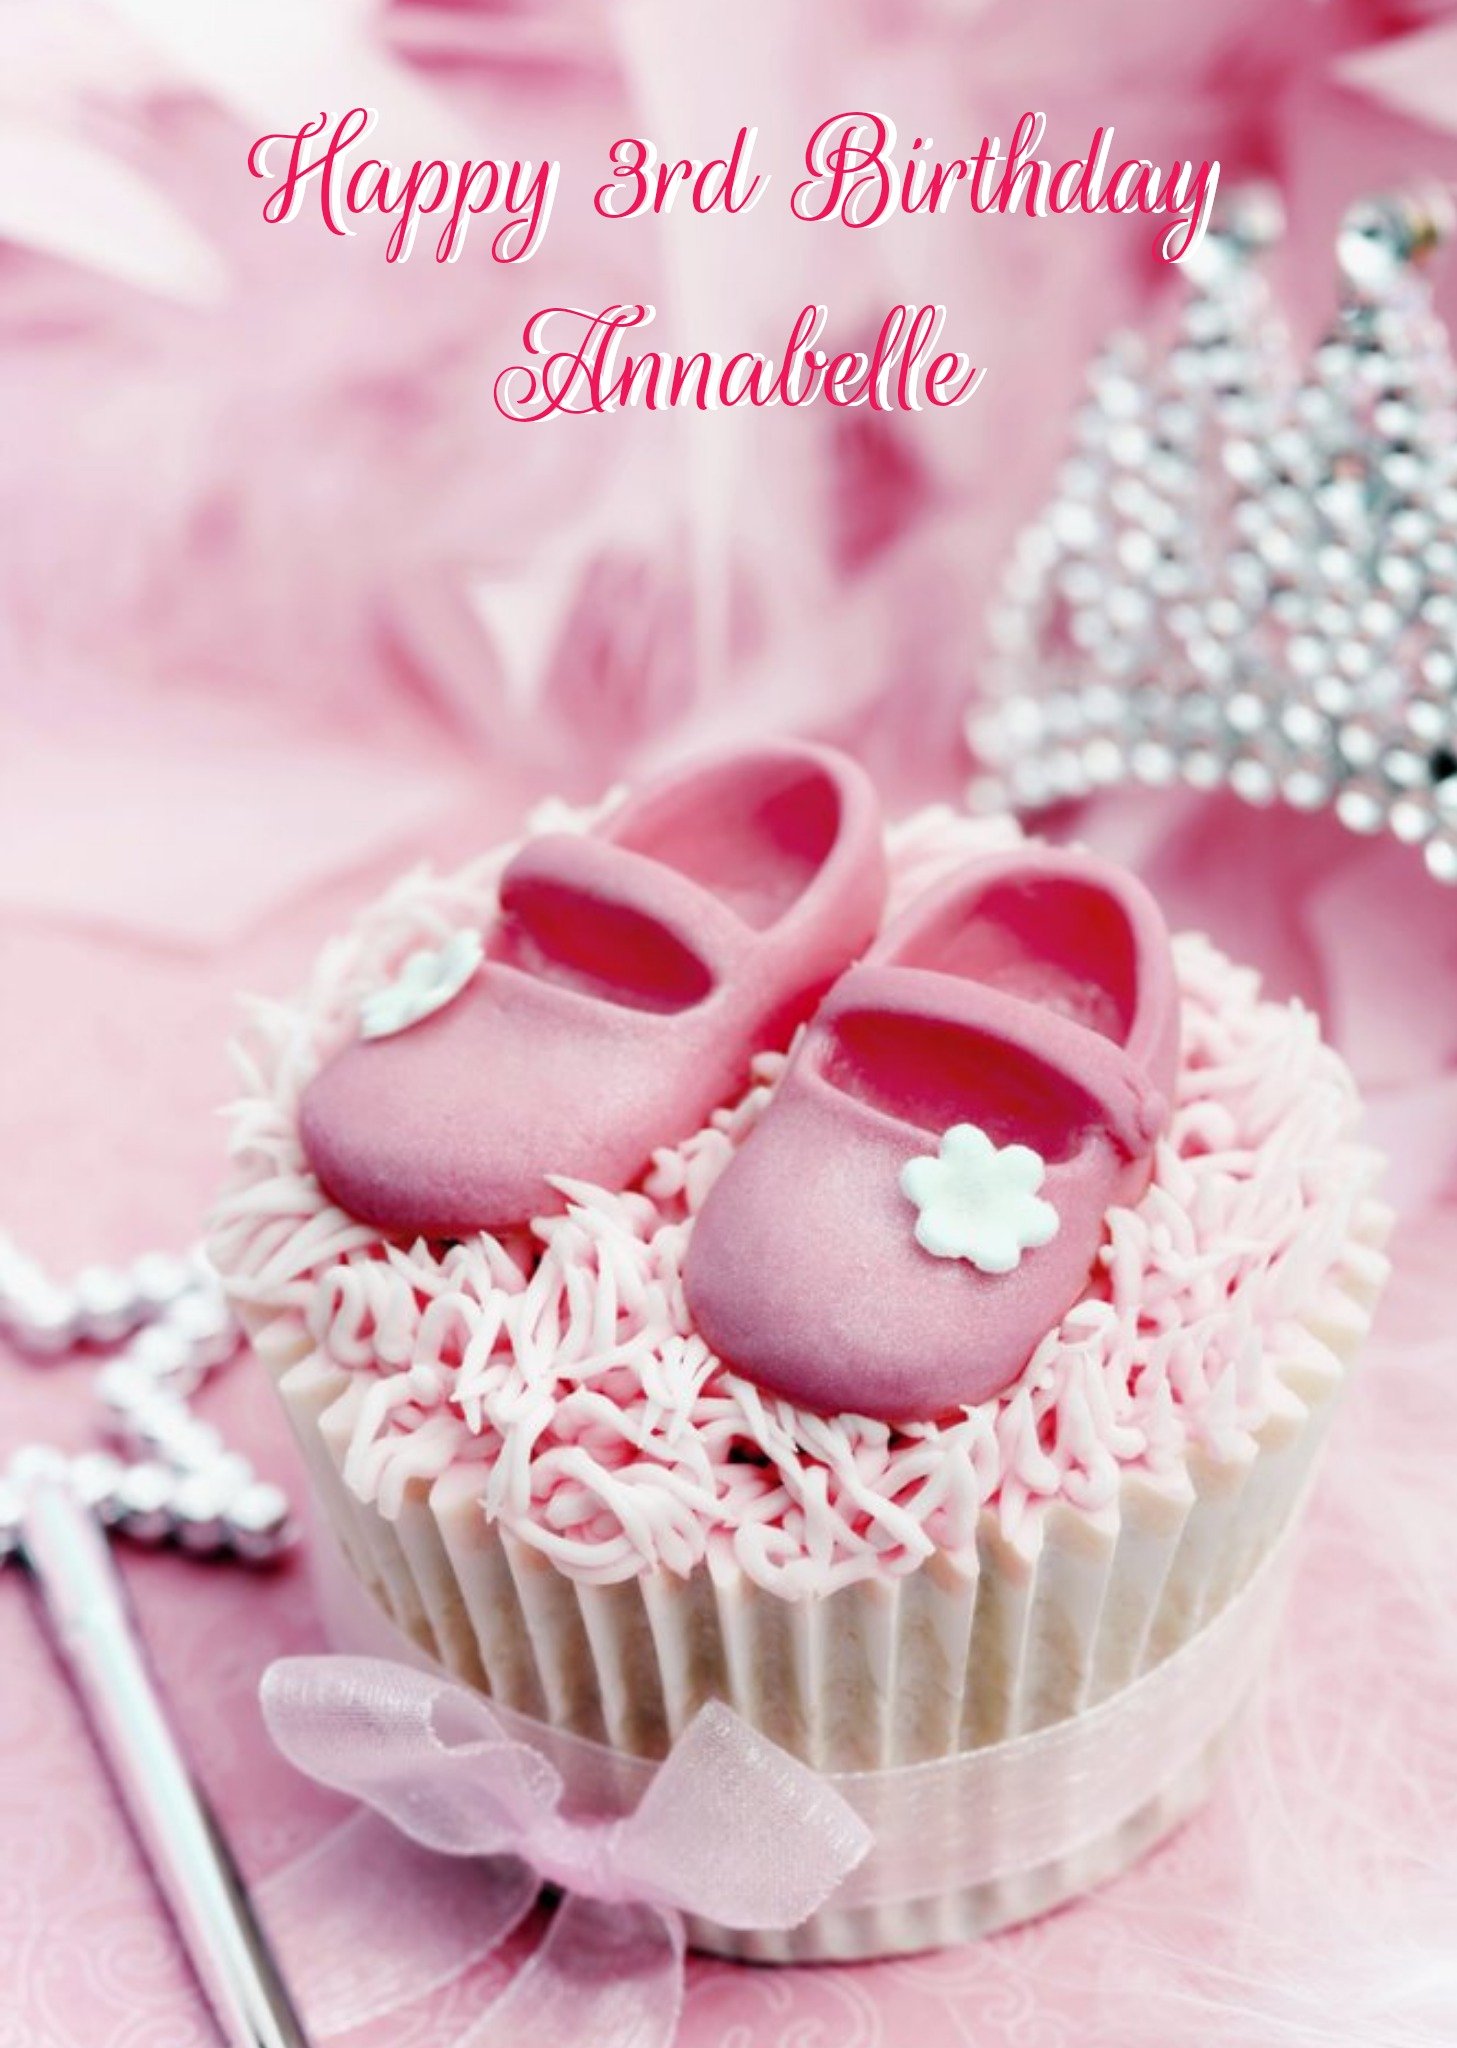 Moonpig Pink Shoes On Cupcake Personalised Happy 3rd Birthday Card, Large